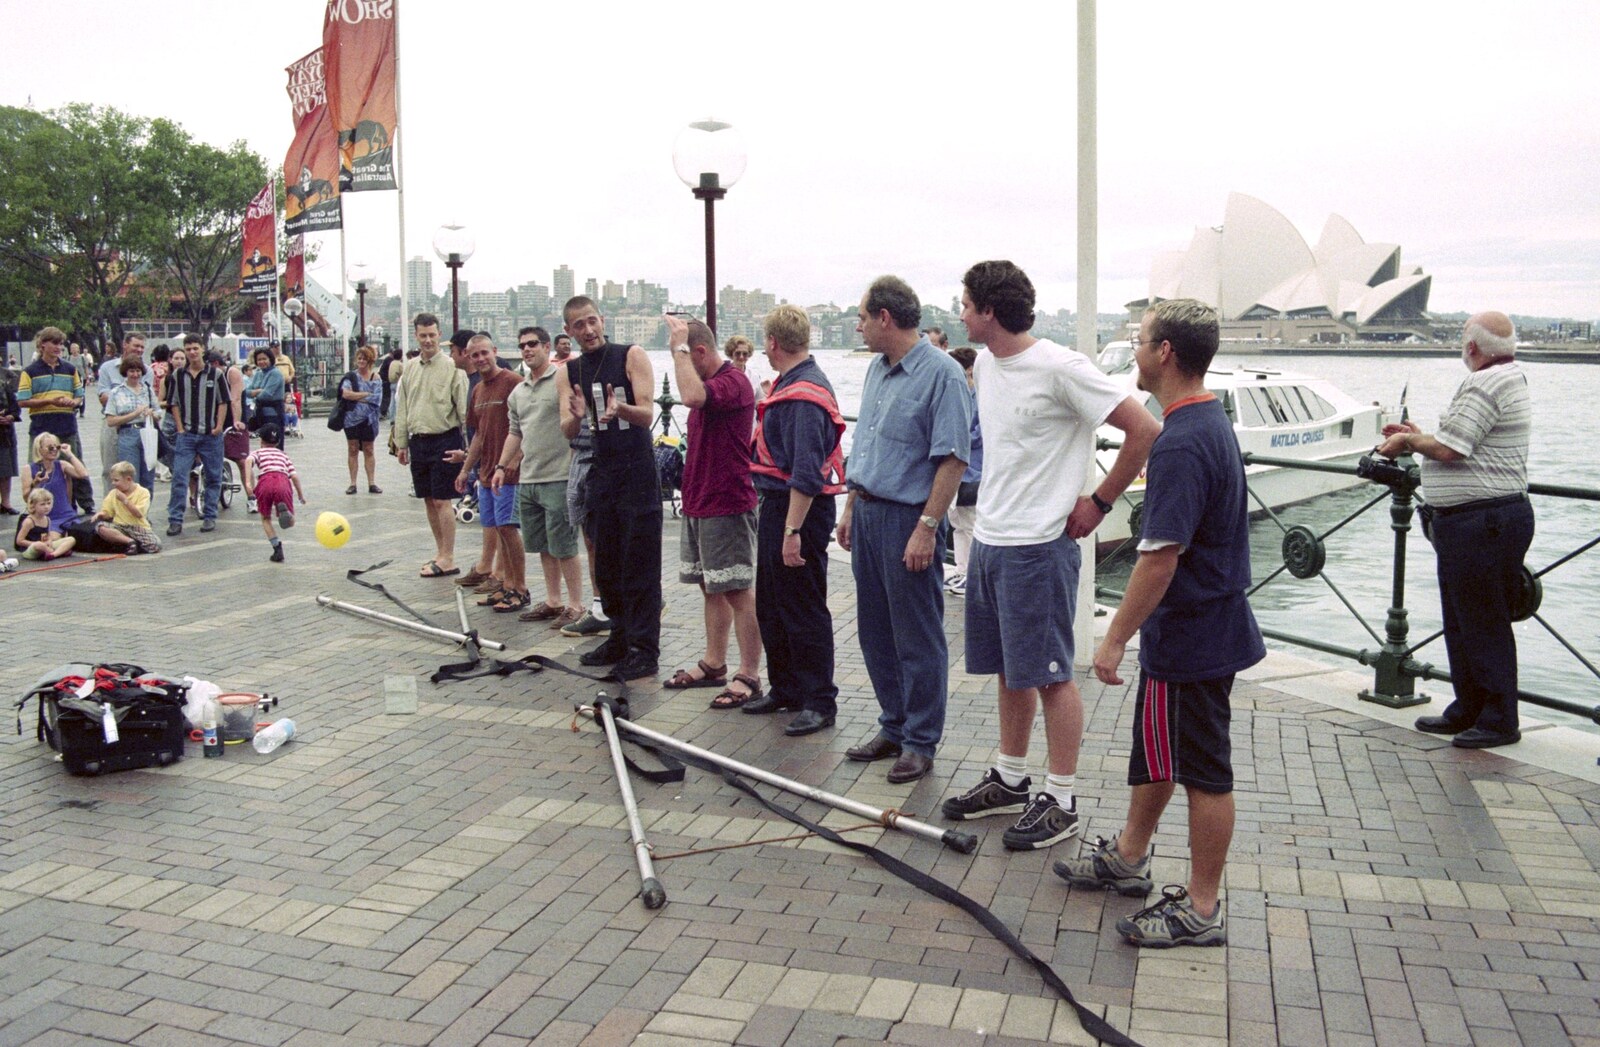 Members of the audience are roped in from A Trip to the Blue Mountains, New South Wales, Australia - 12th April 2000